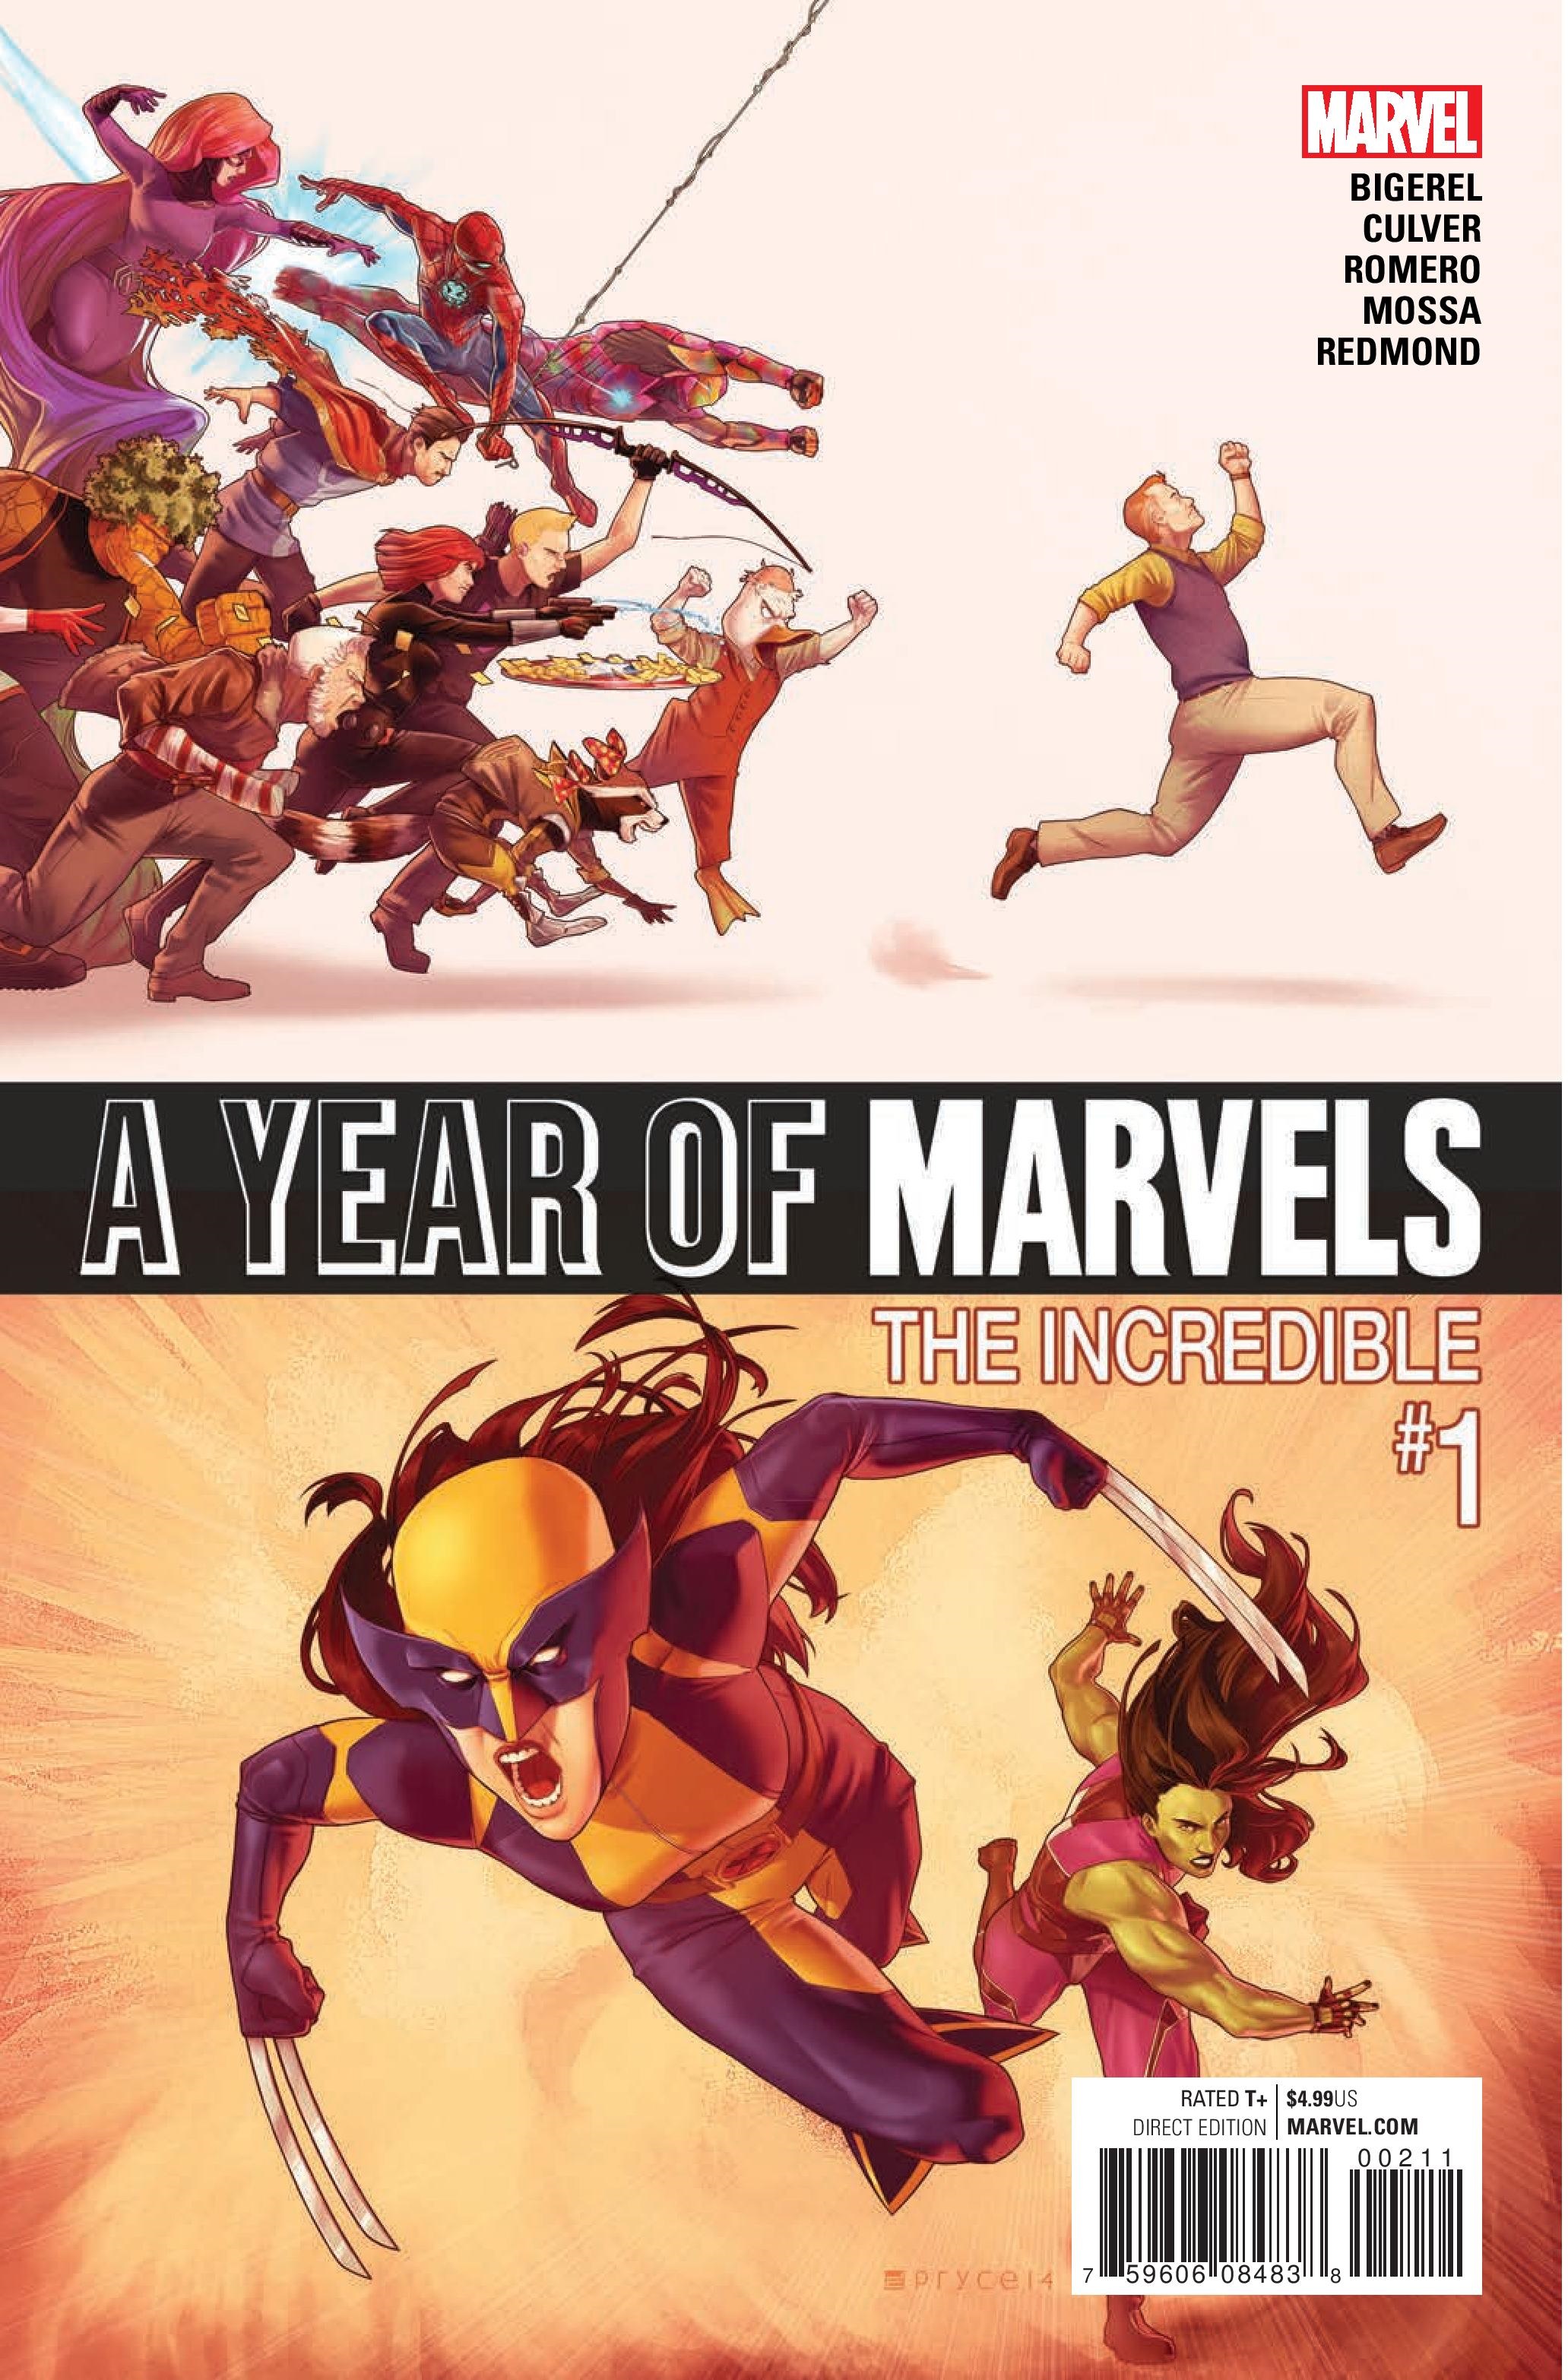 A Year of Marvels: The Incredible (2016) #1